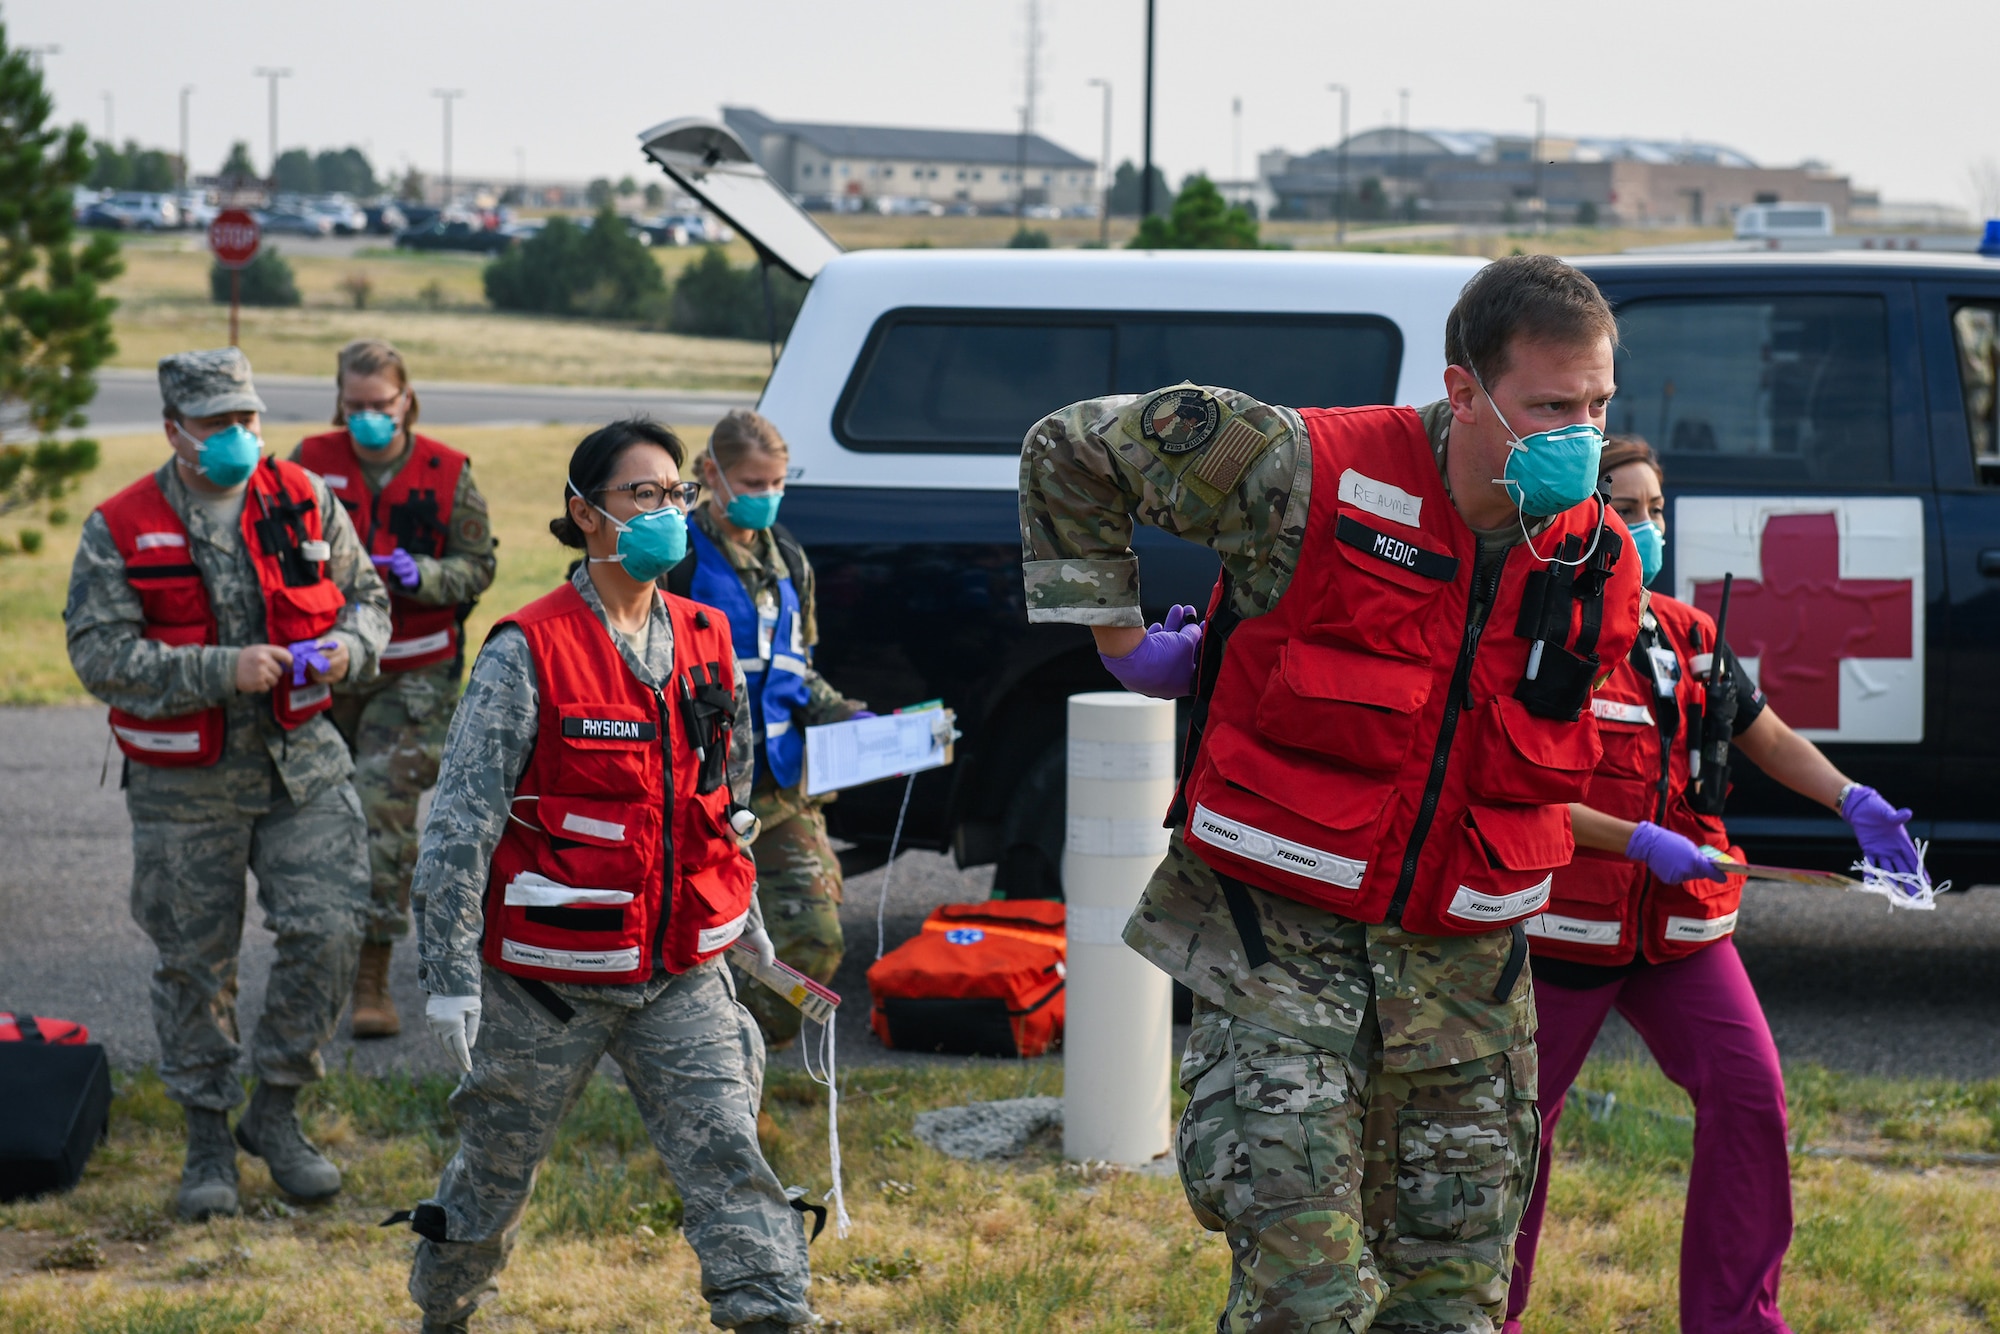 Airmen from the 460th Medical Group arrive on scene during the Ready Eagle exercise where a simulated explosion occurred Sept. 18, 2020, at the Air Reserve Personnel Center on Buckley Air Force Base, Colo.